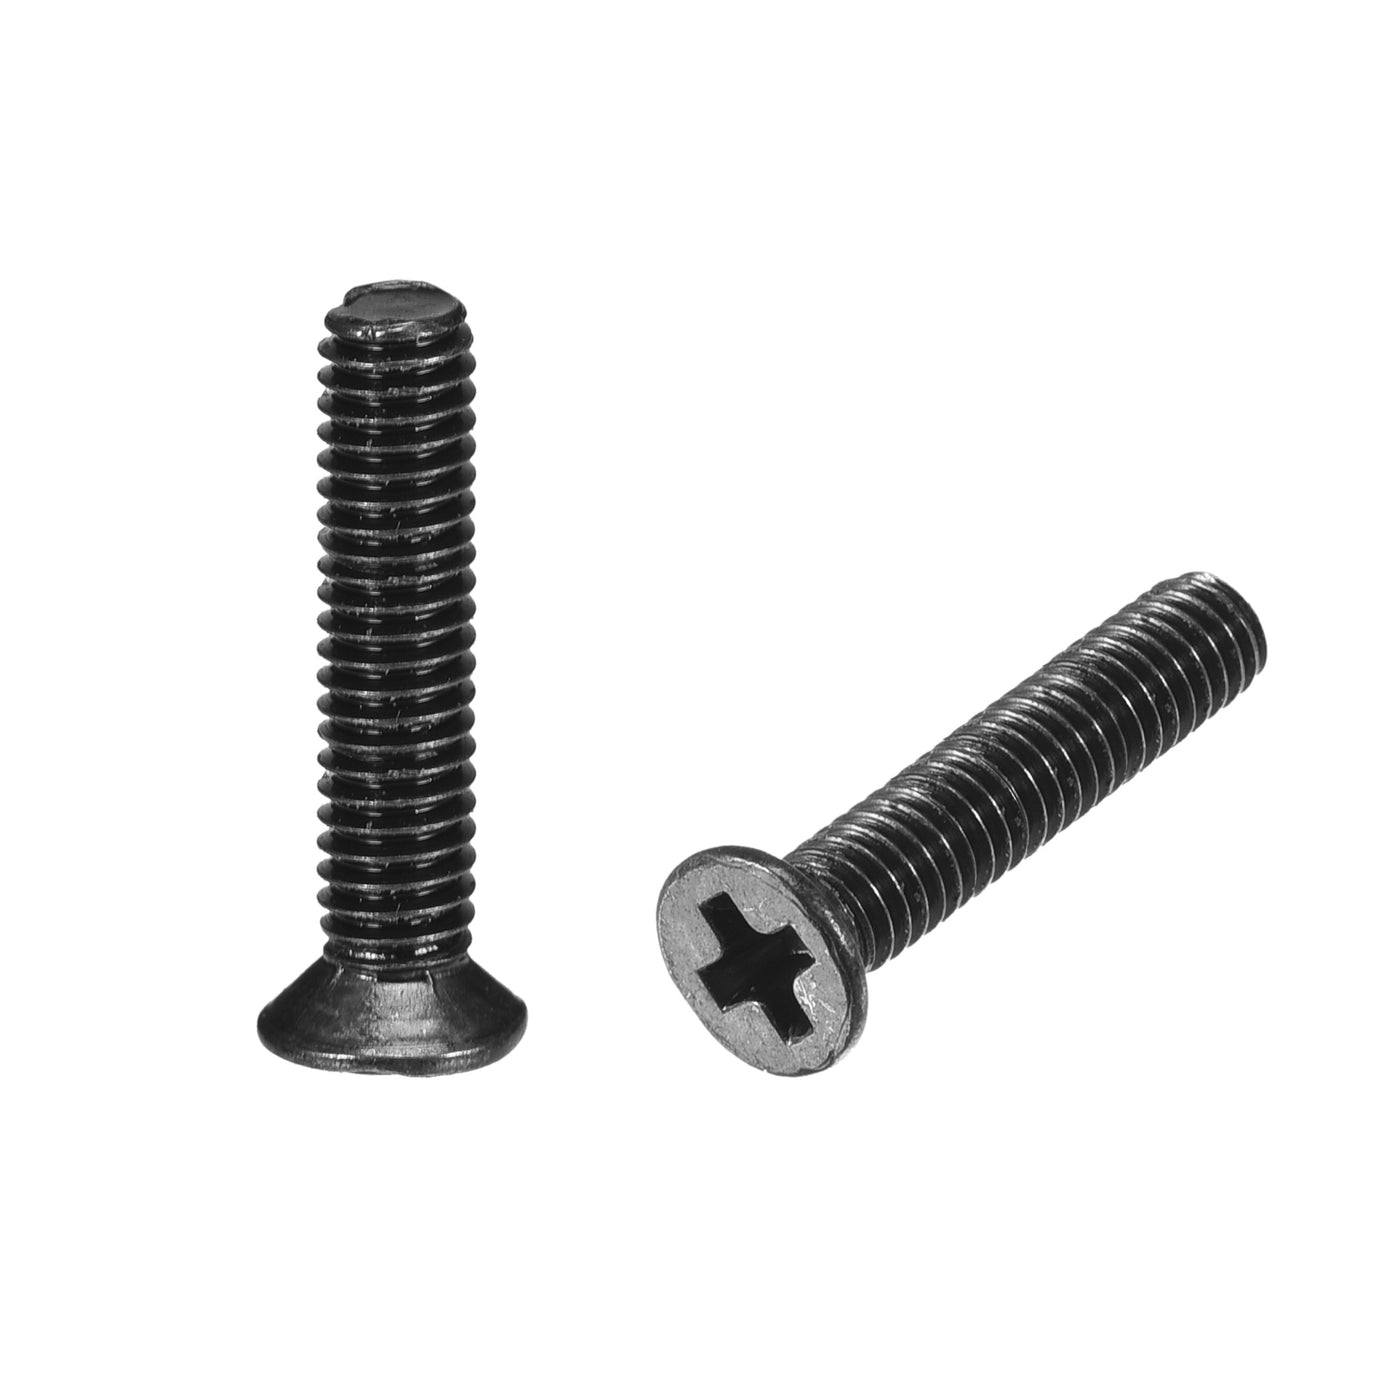 uxcell Uxcell M2.5 x 12mm Phillips Flat Head Screws Carbon Steel Machine Screws Black for Home Office Computer Case Appliance Equipment 350pcs